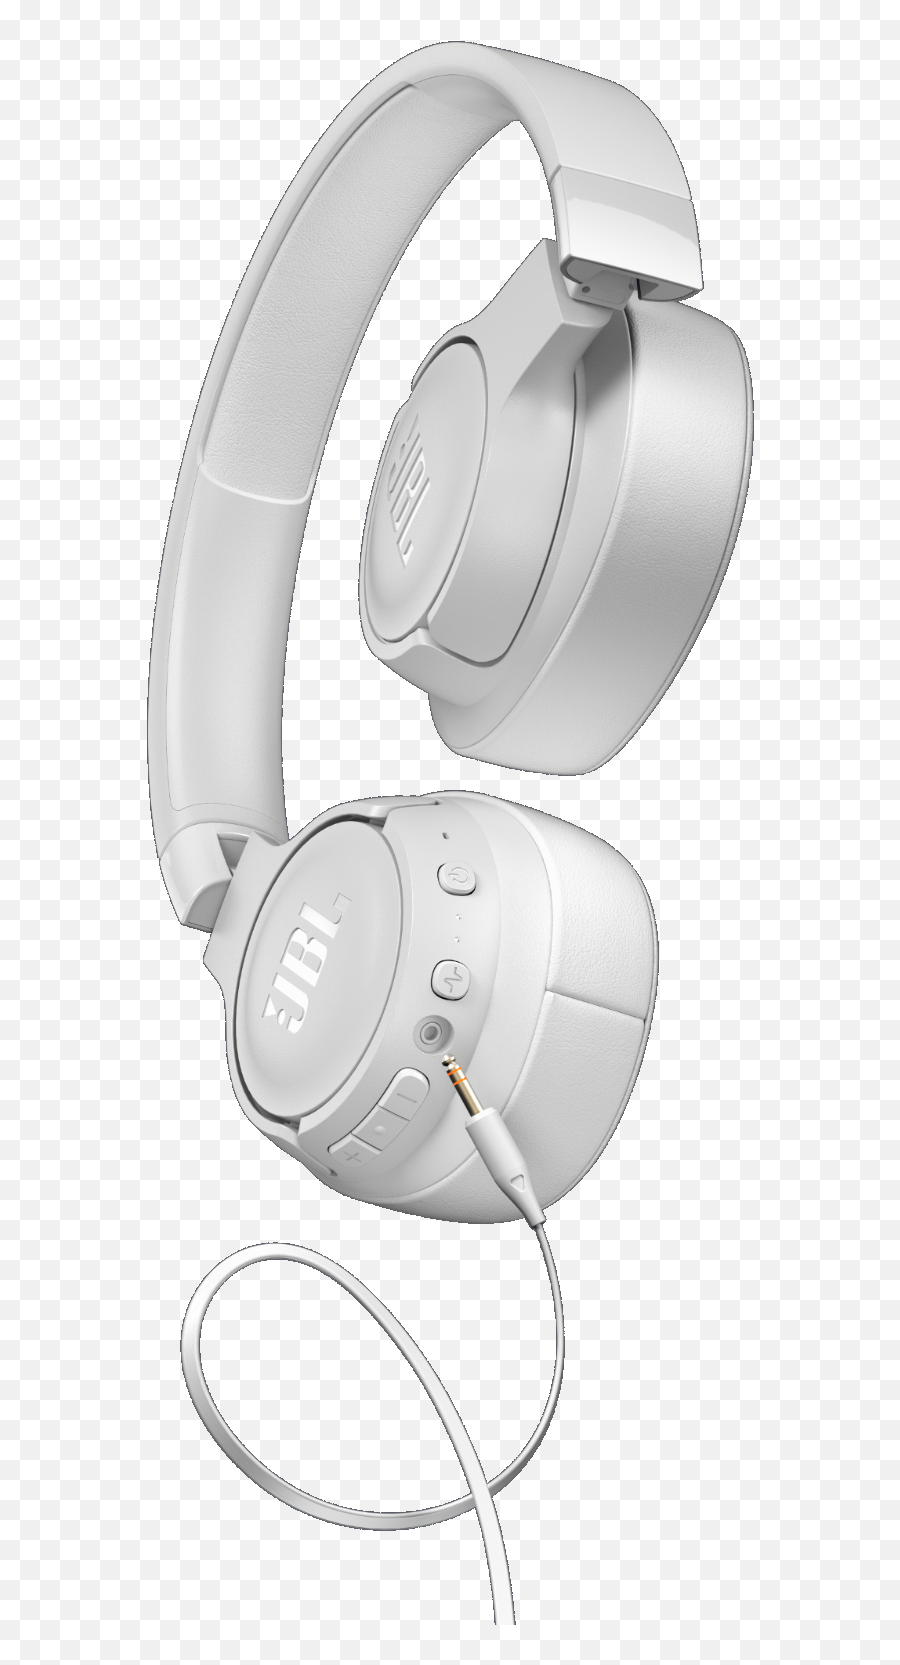 Jbl Tune 750btnc Wireless Over - Ear Anc Headphones Casque Jbl 750 Bt Png,Unable To Adjust Sound From Sound Icon